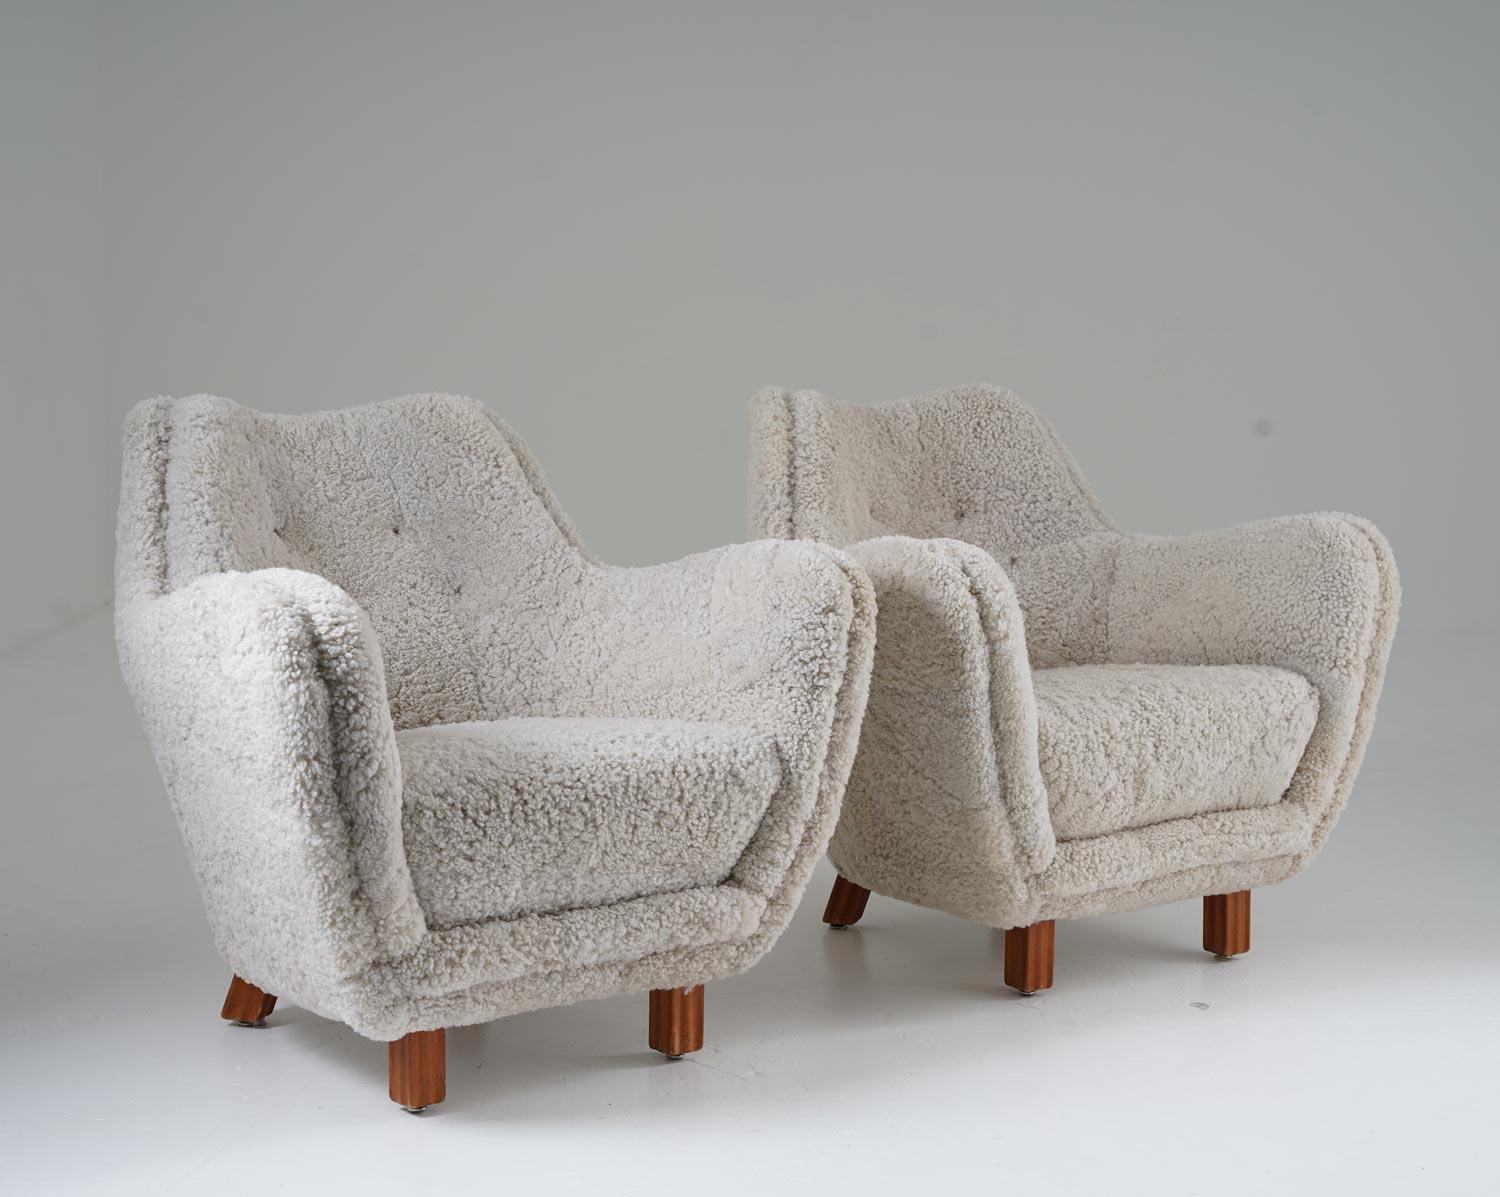 Stunning Swedish lounge chairs by Sten Wicéns Möbelfabrik, 1950s
These organically shaped chairs are constructed with a very high sense of quality and design. 

Condition: Very good, reupholstered.
 